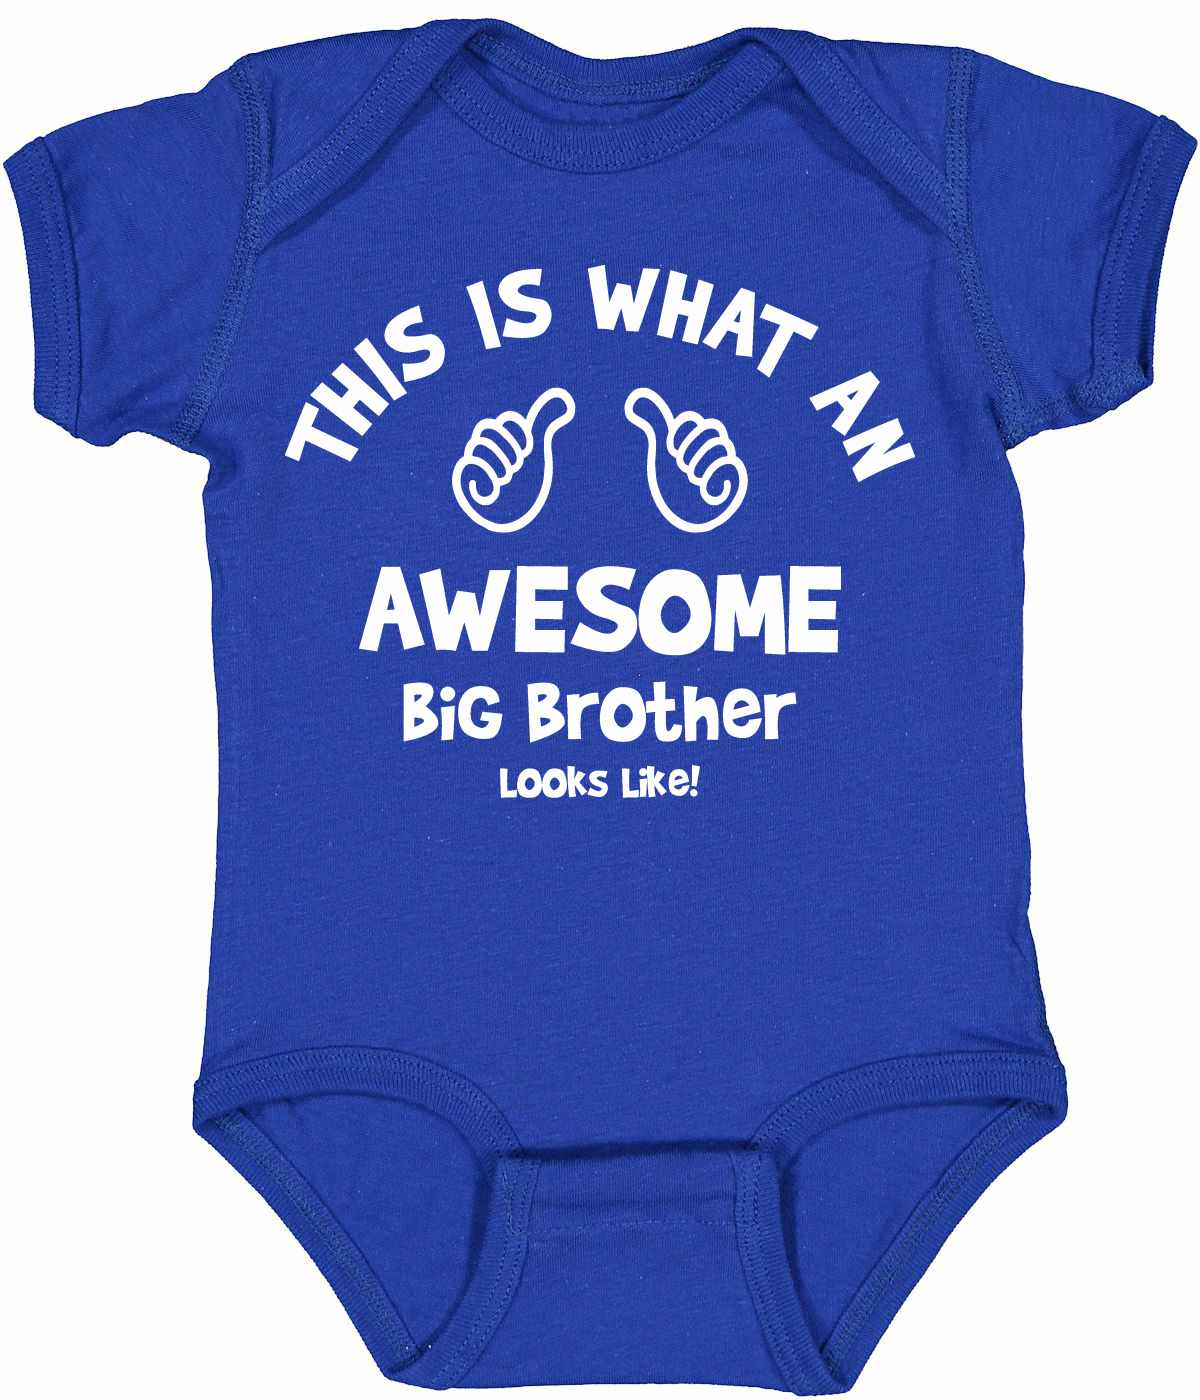 This is What an AWESOME BIG BROTHER Looks Like Infant BodySuit